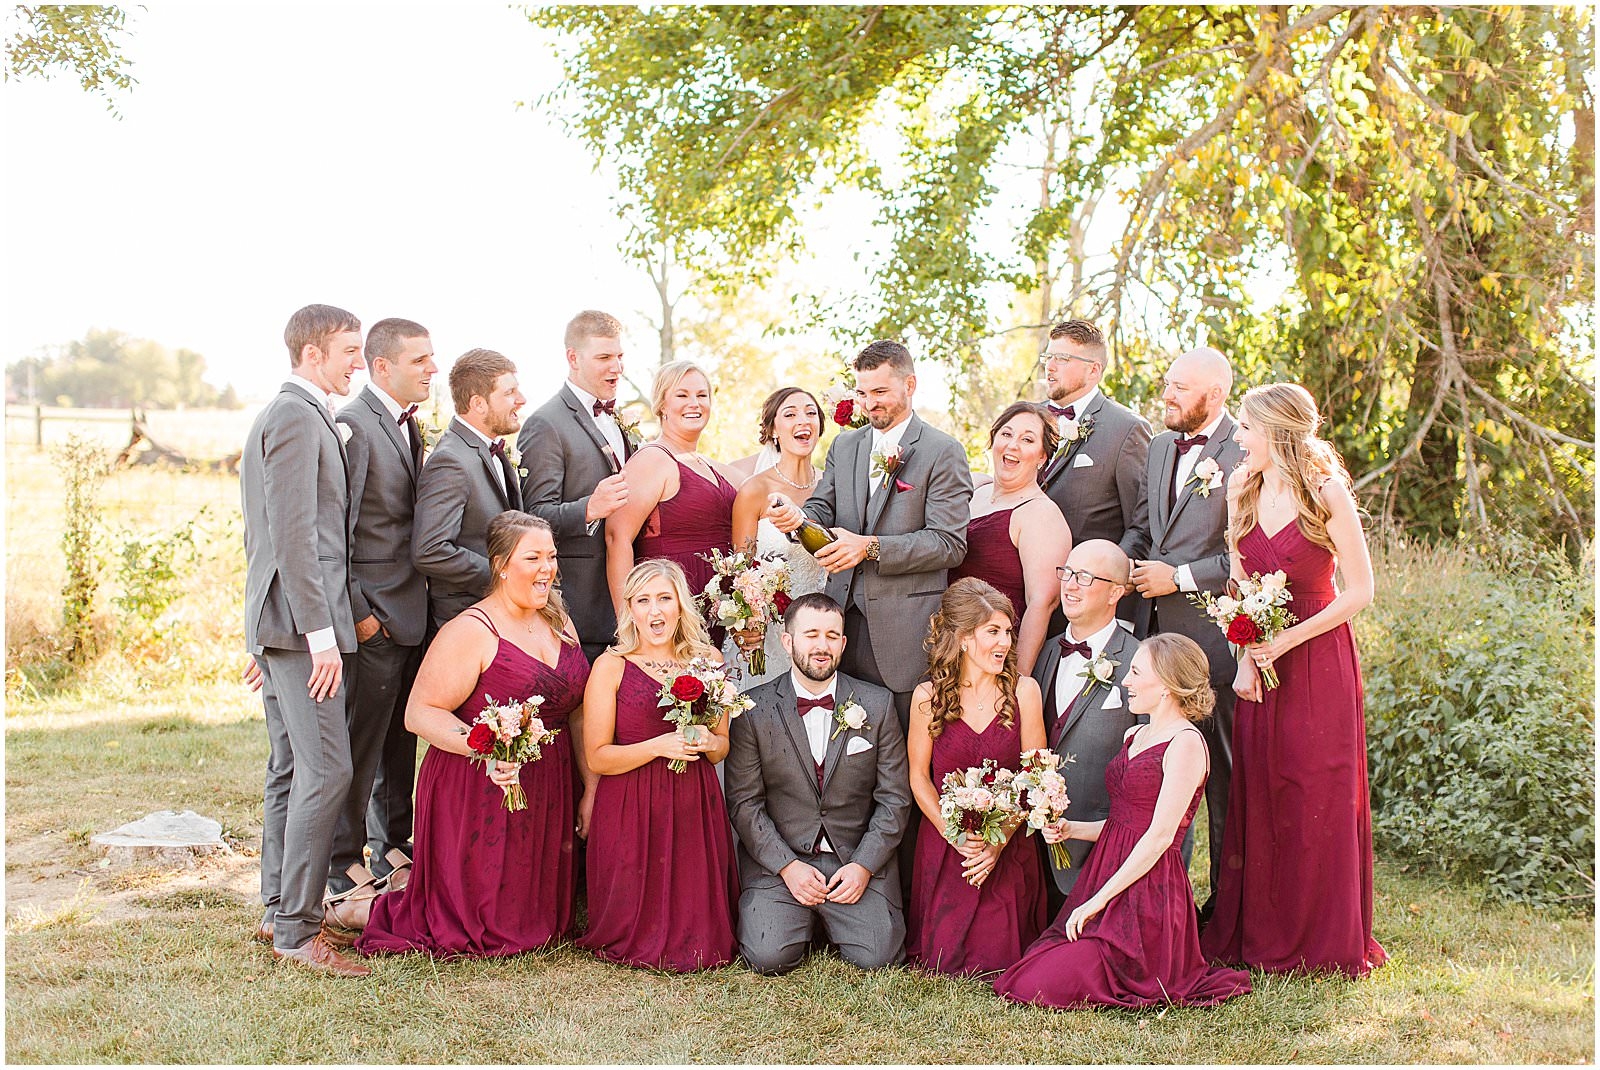 A Stunning Fall Wedding in Indianapolis, IN |. Sally and Andrew | Bret and Brandie Photography 0133.jpg